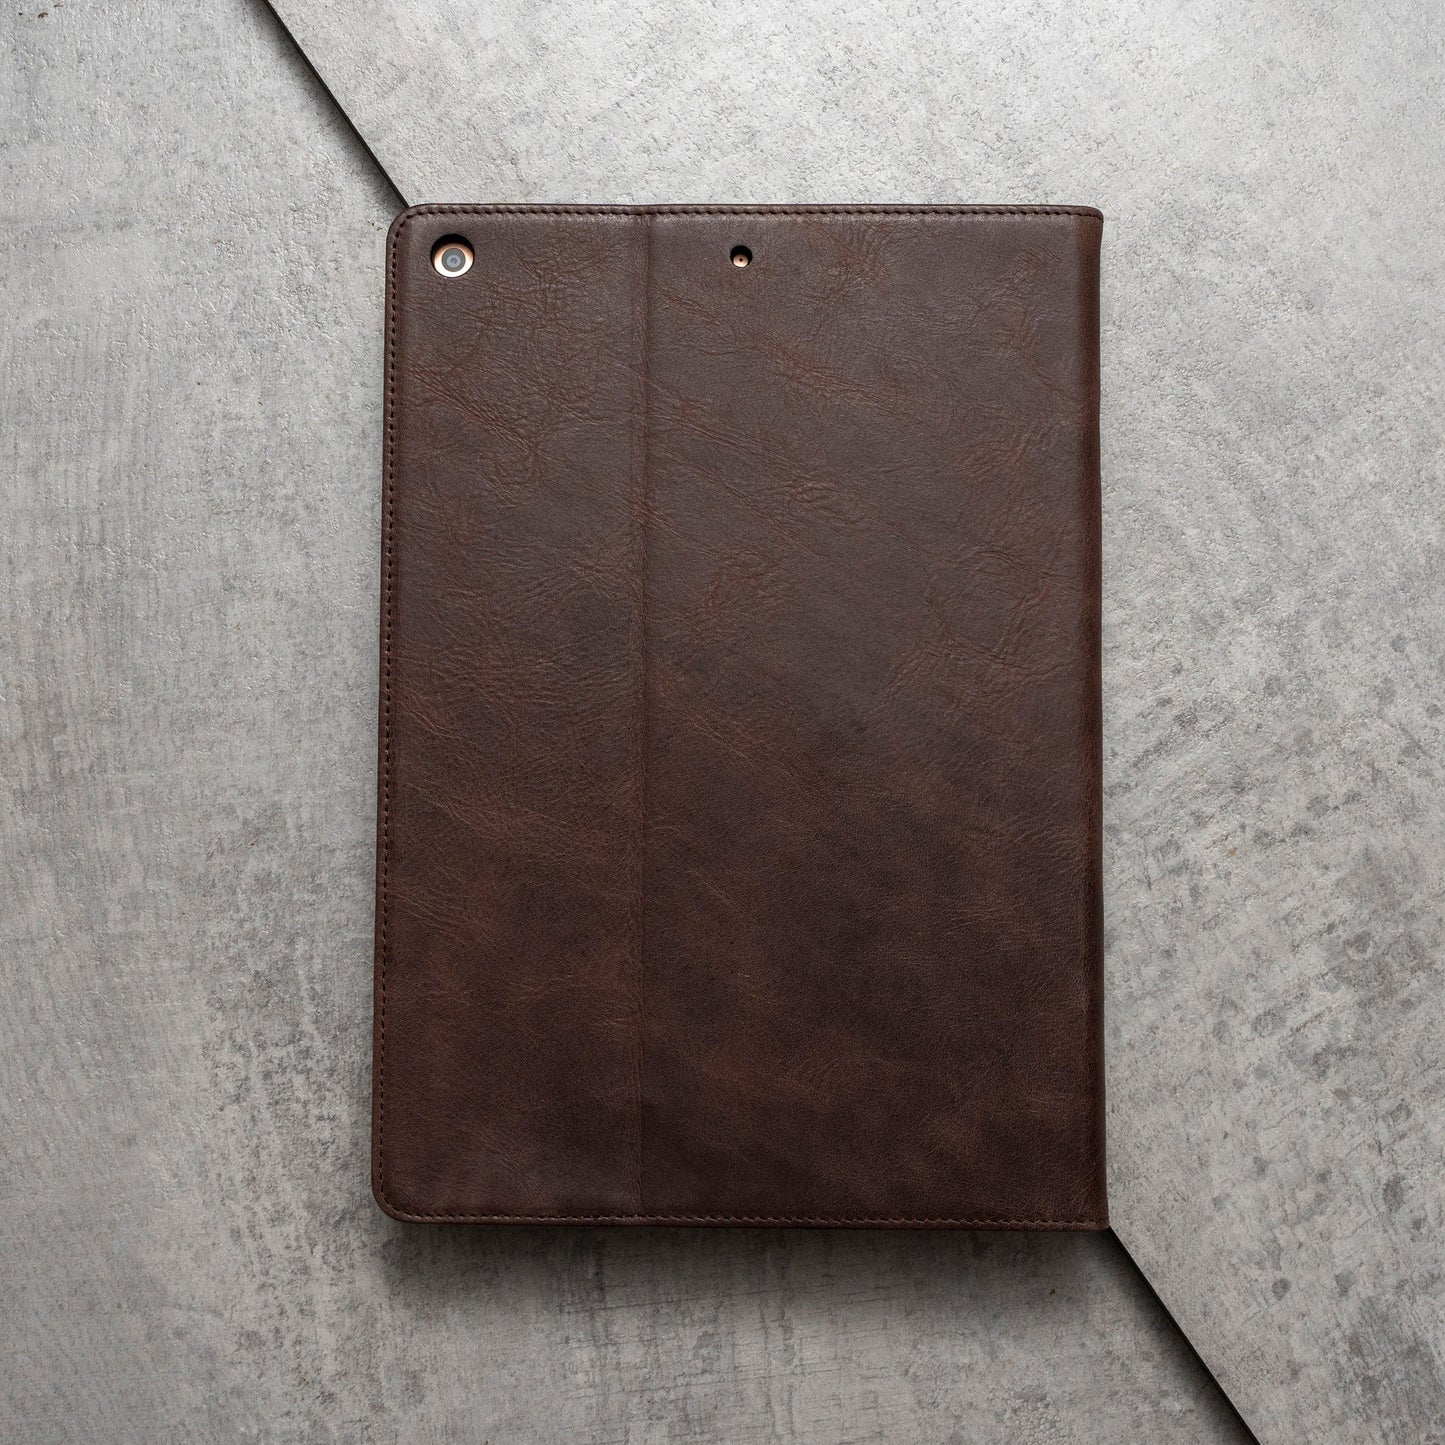 iPad 10.2" 7th/8th Generation Leather Case. Premium Genuine Leather Stand/Cover/Flip Case (Chocolate Brown)